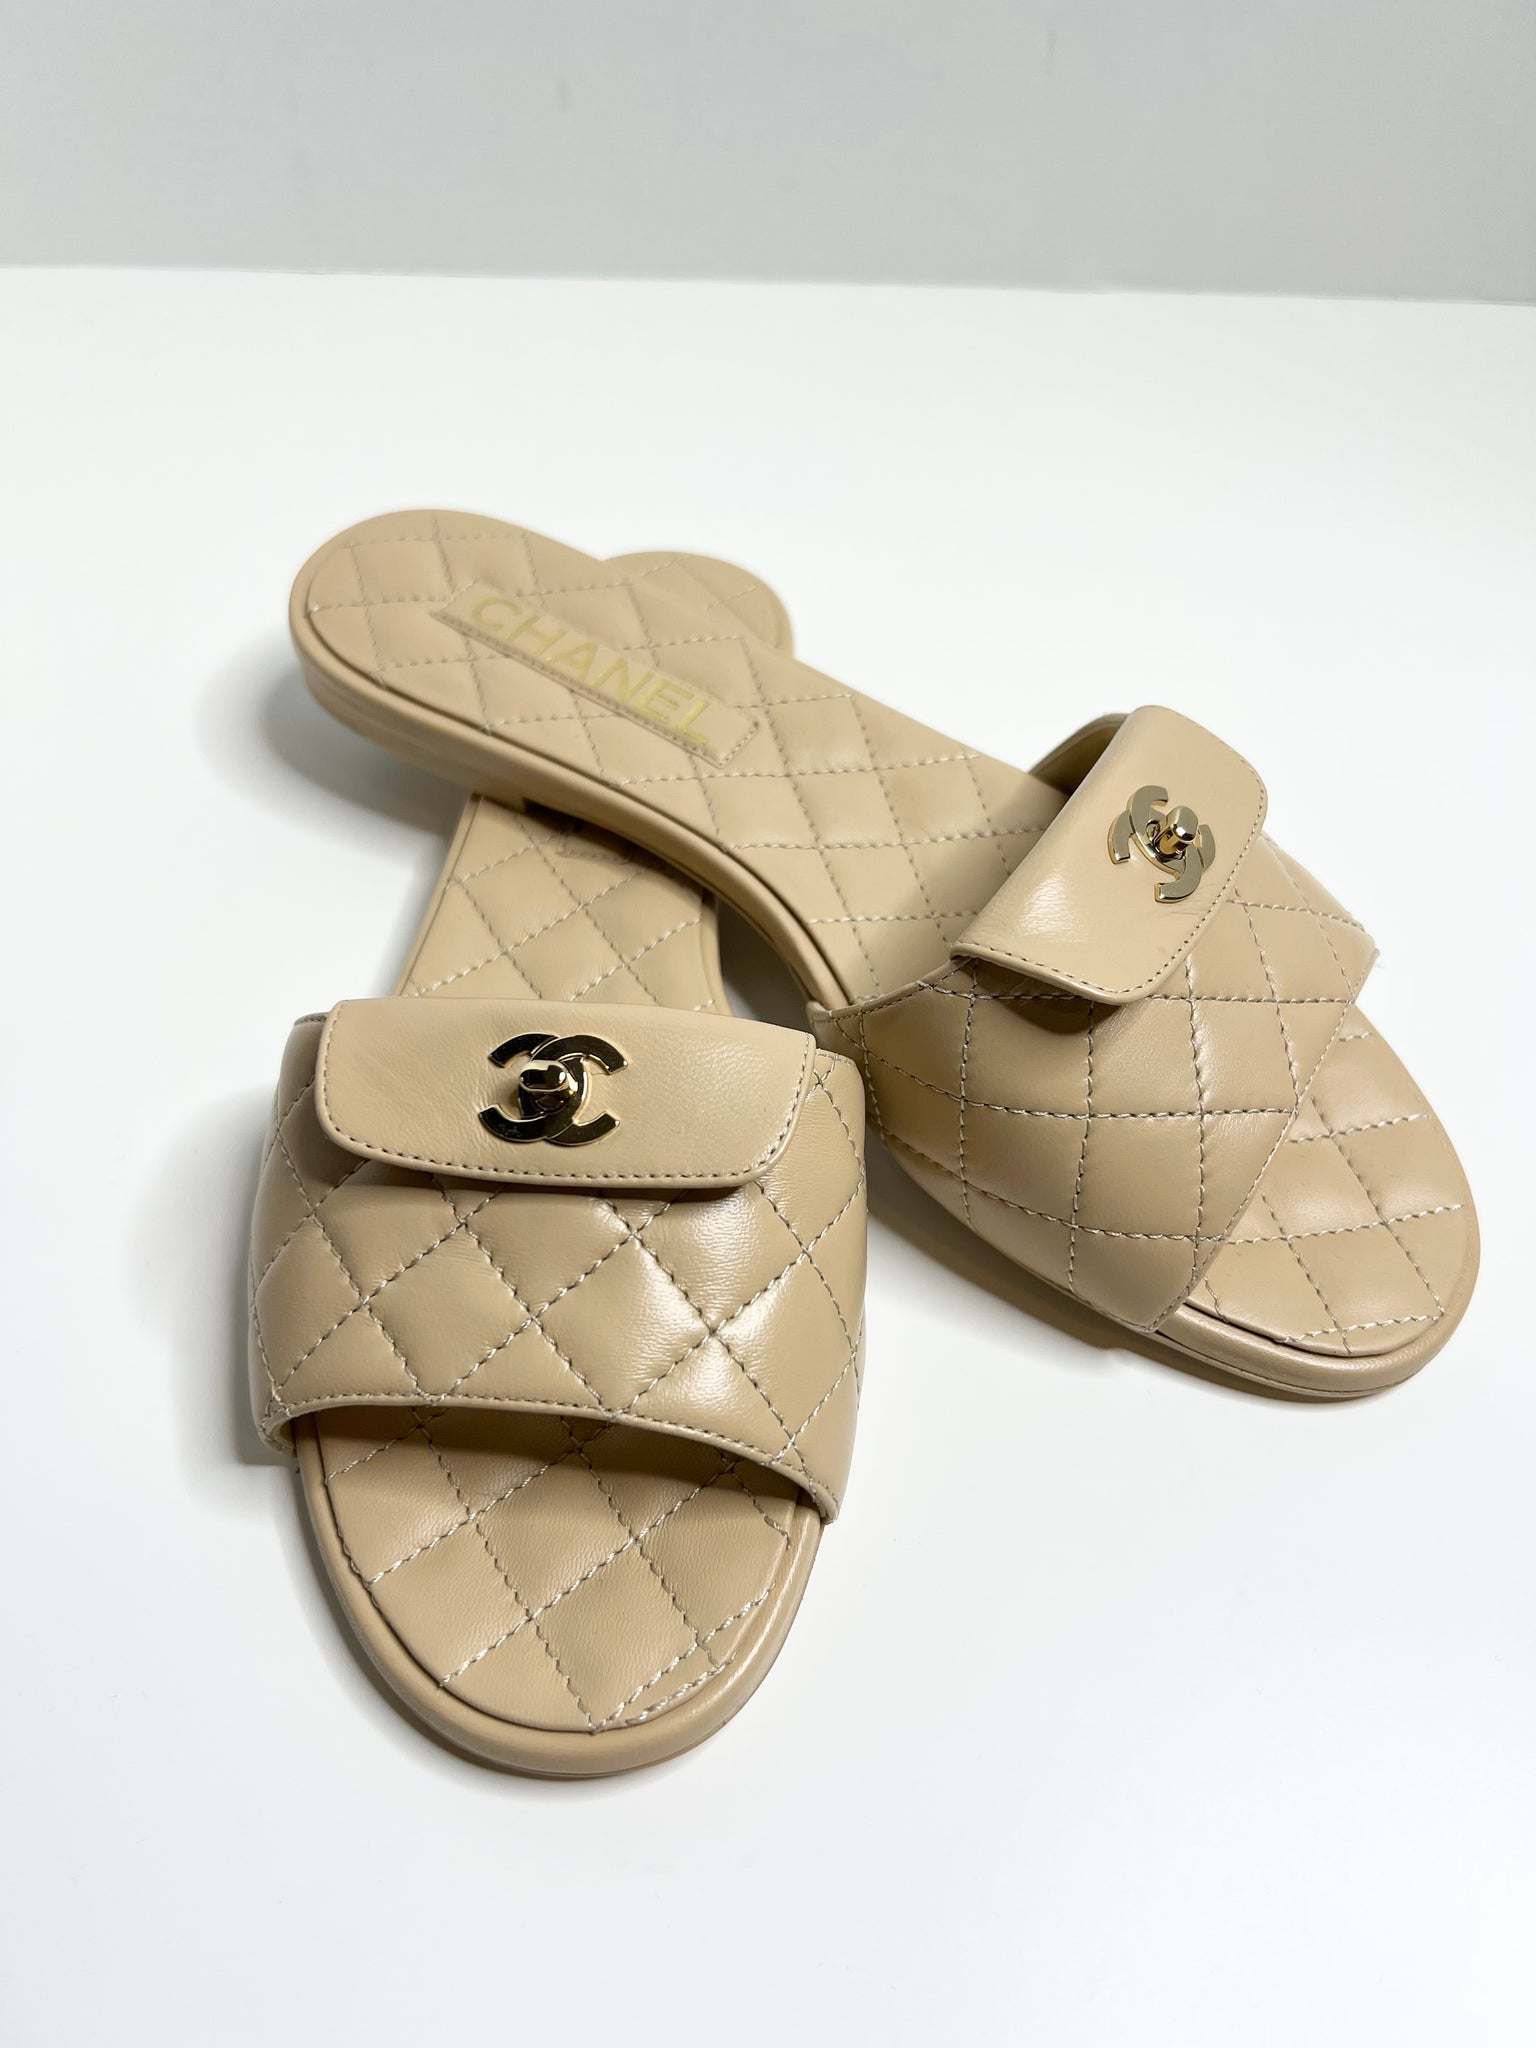 CHANEL Cord Lambskin Quilted Logo Sandals 37 Black 703654